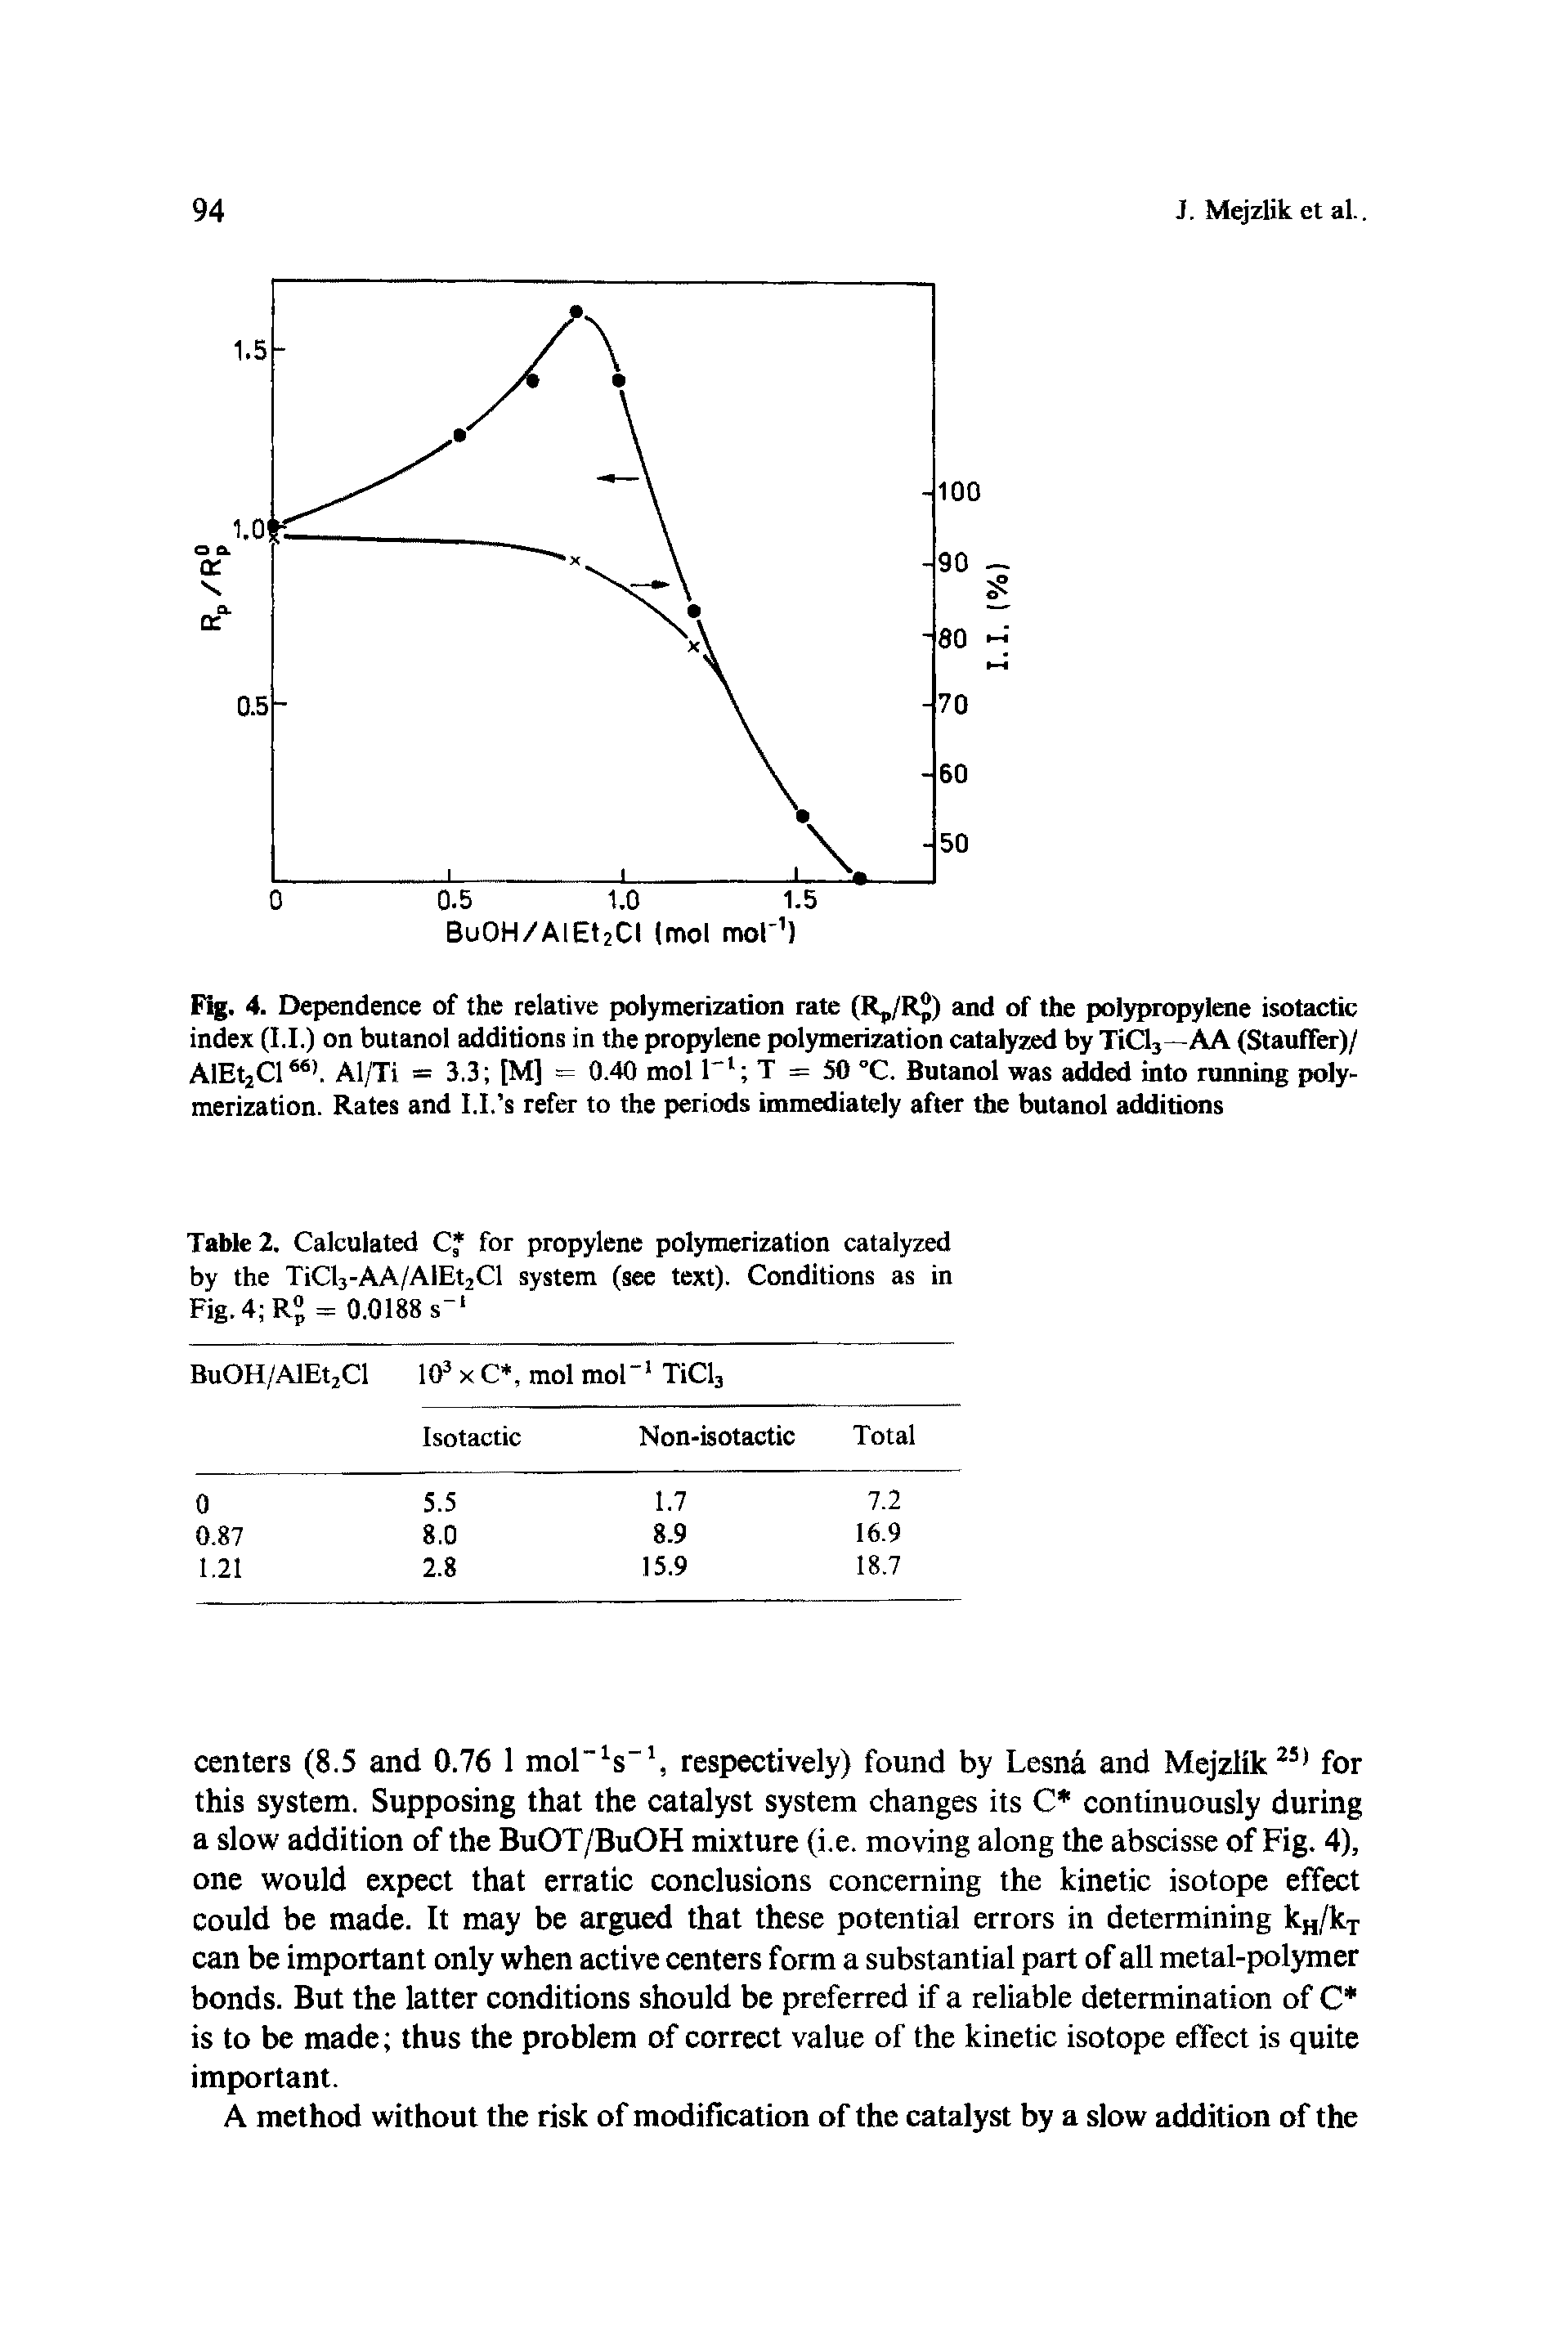 Fig. 4. Dependence of the relative polymerization rate (R /R ) and of the polypropylene isotactic index (I.I.) on butanol additions in the propylene polymerization catalyzed by TiCl3—AA (Stauffer)/ AlEt2Cl66). Al/Ti = 3.3 [M] = 0.40 mol l-1 T = 50 °C. Butanol was added into running polymerization. Rates and I.I. s refer to the periods immediately after the butanol additions...